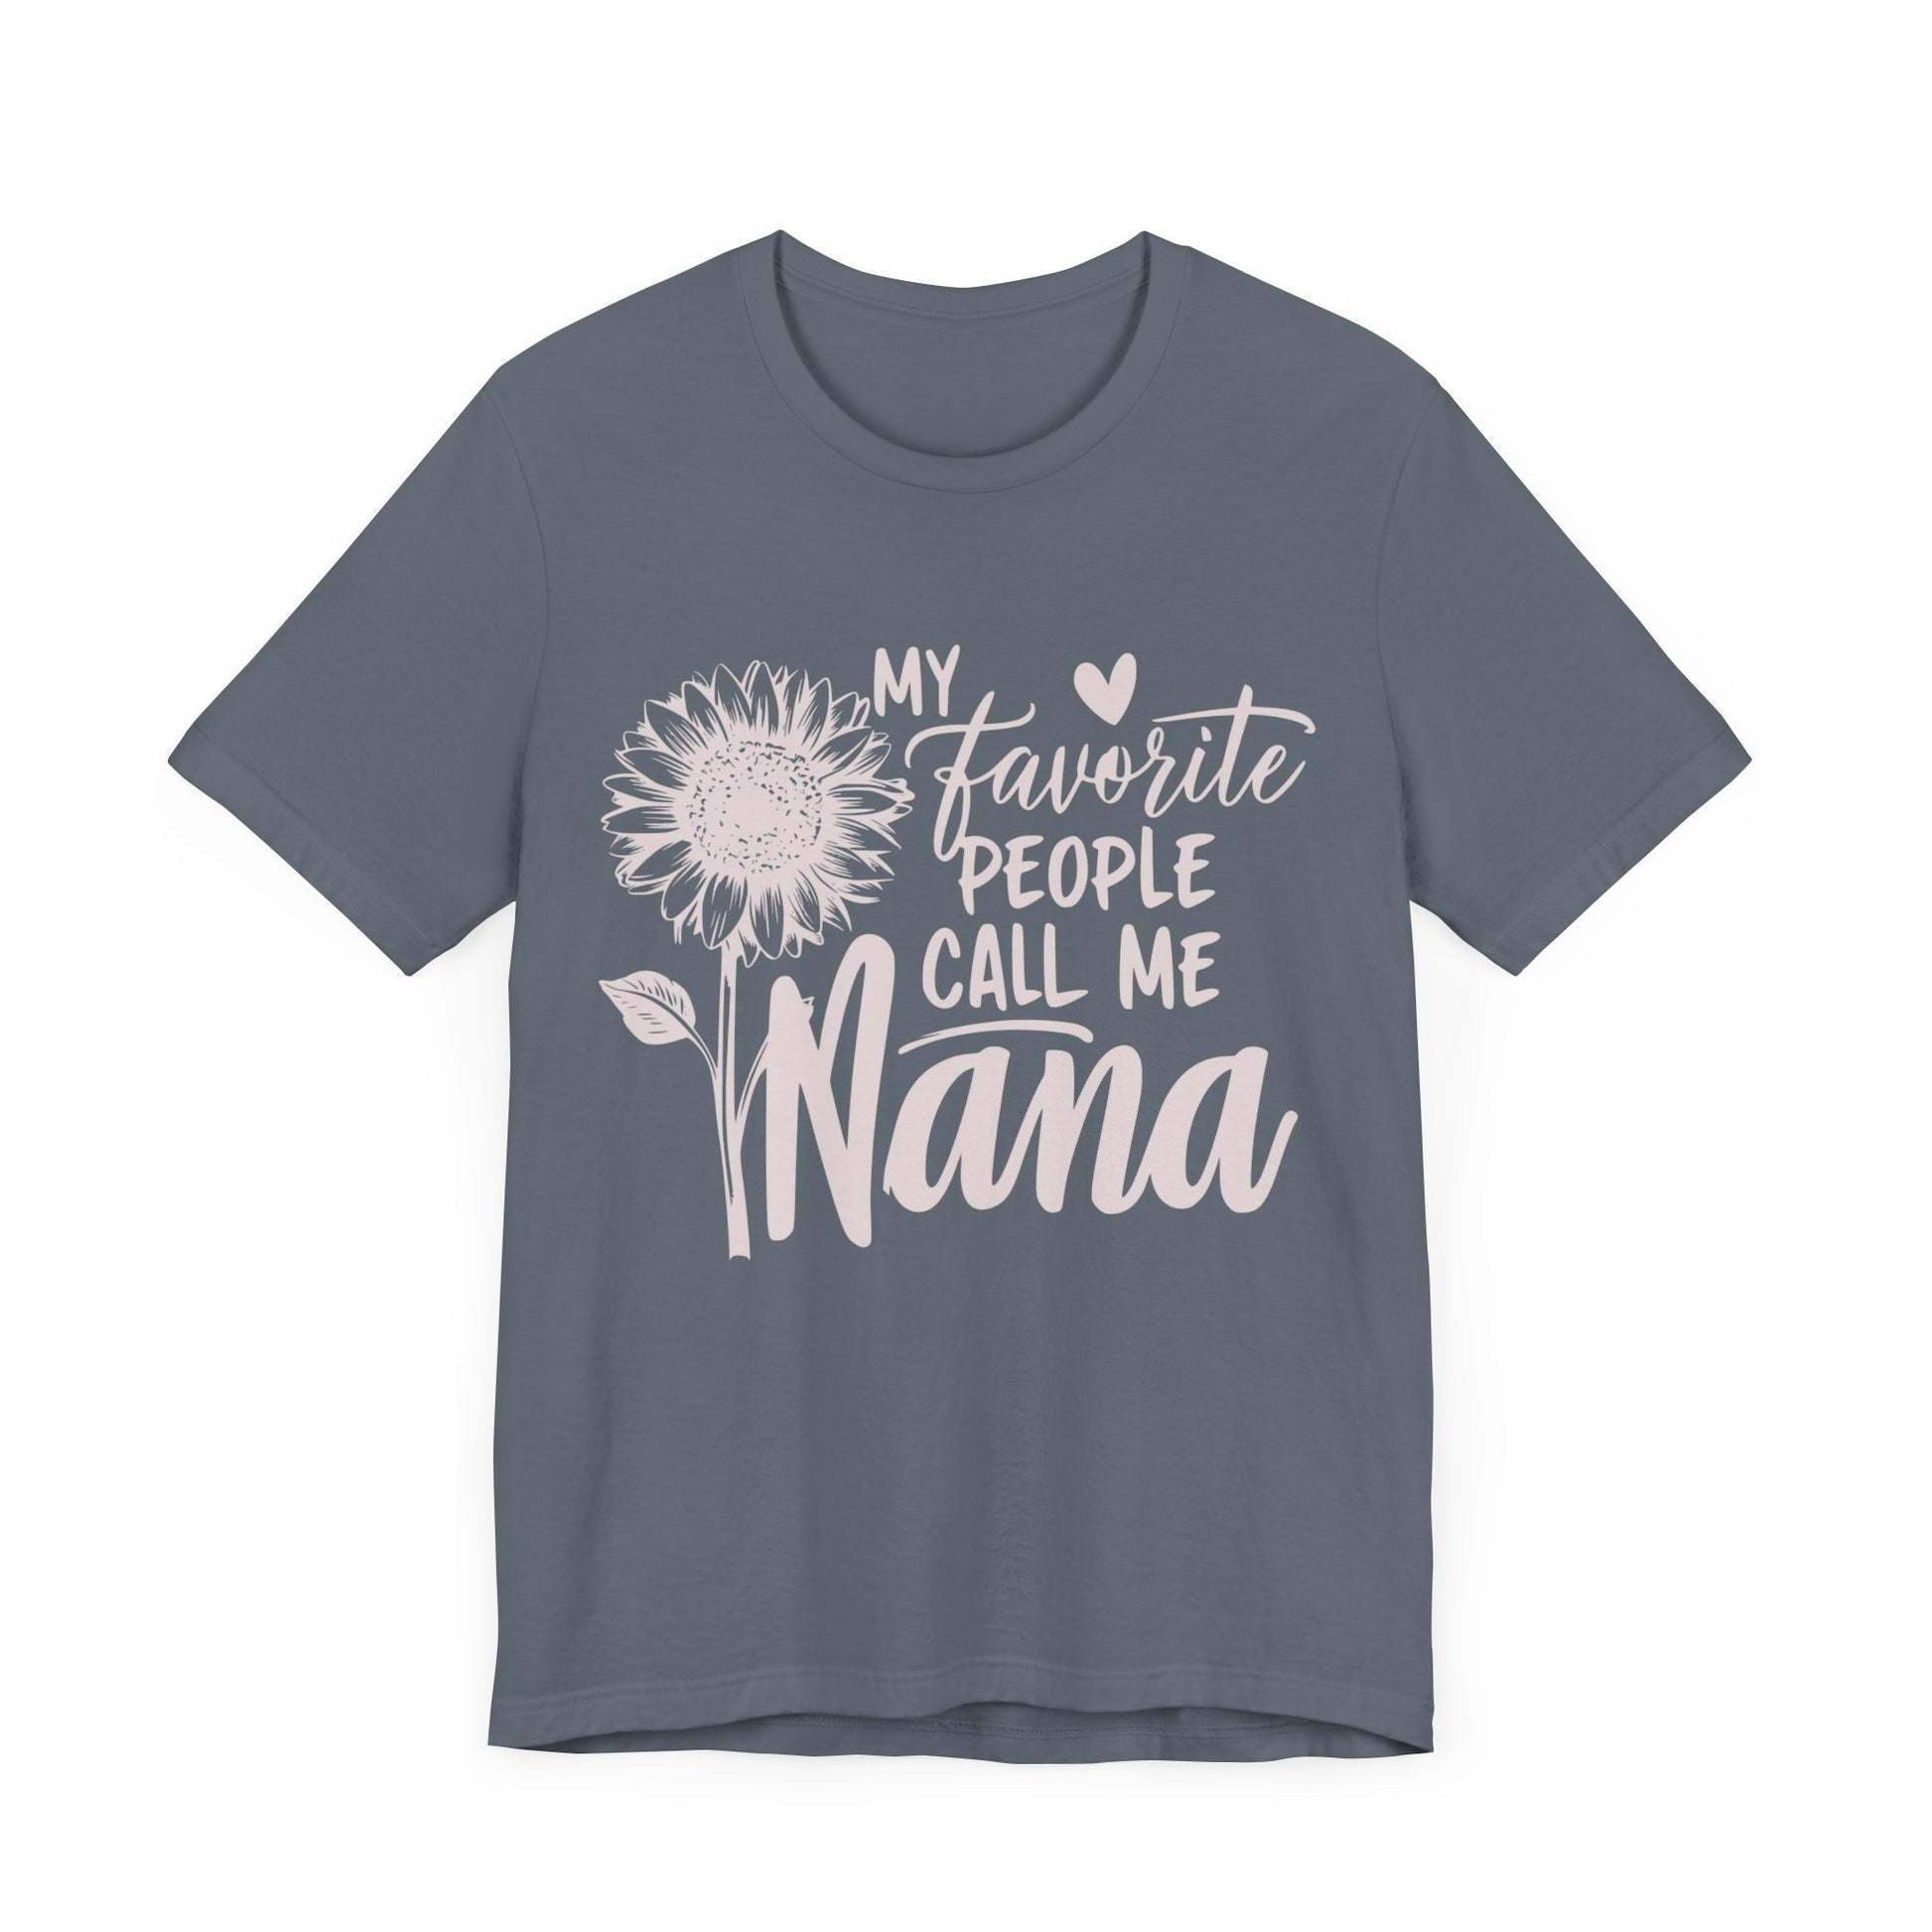 "Ethically Made Nana T-Shirt with Floral Typography"